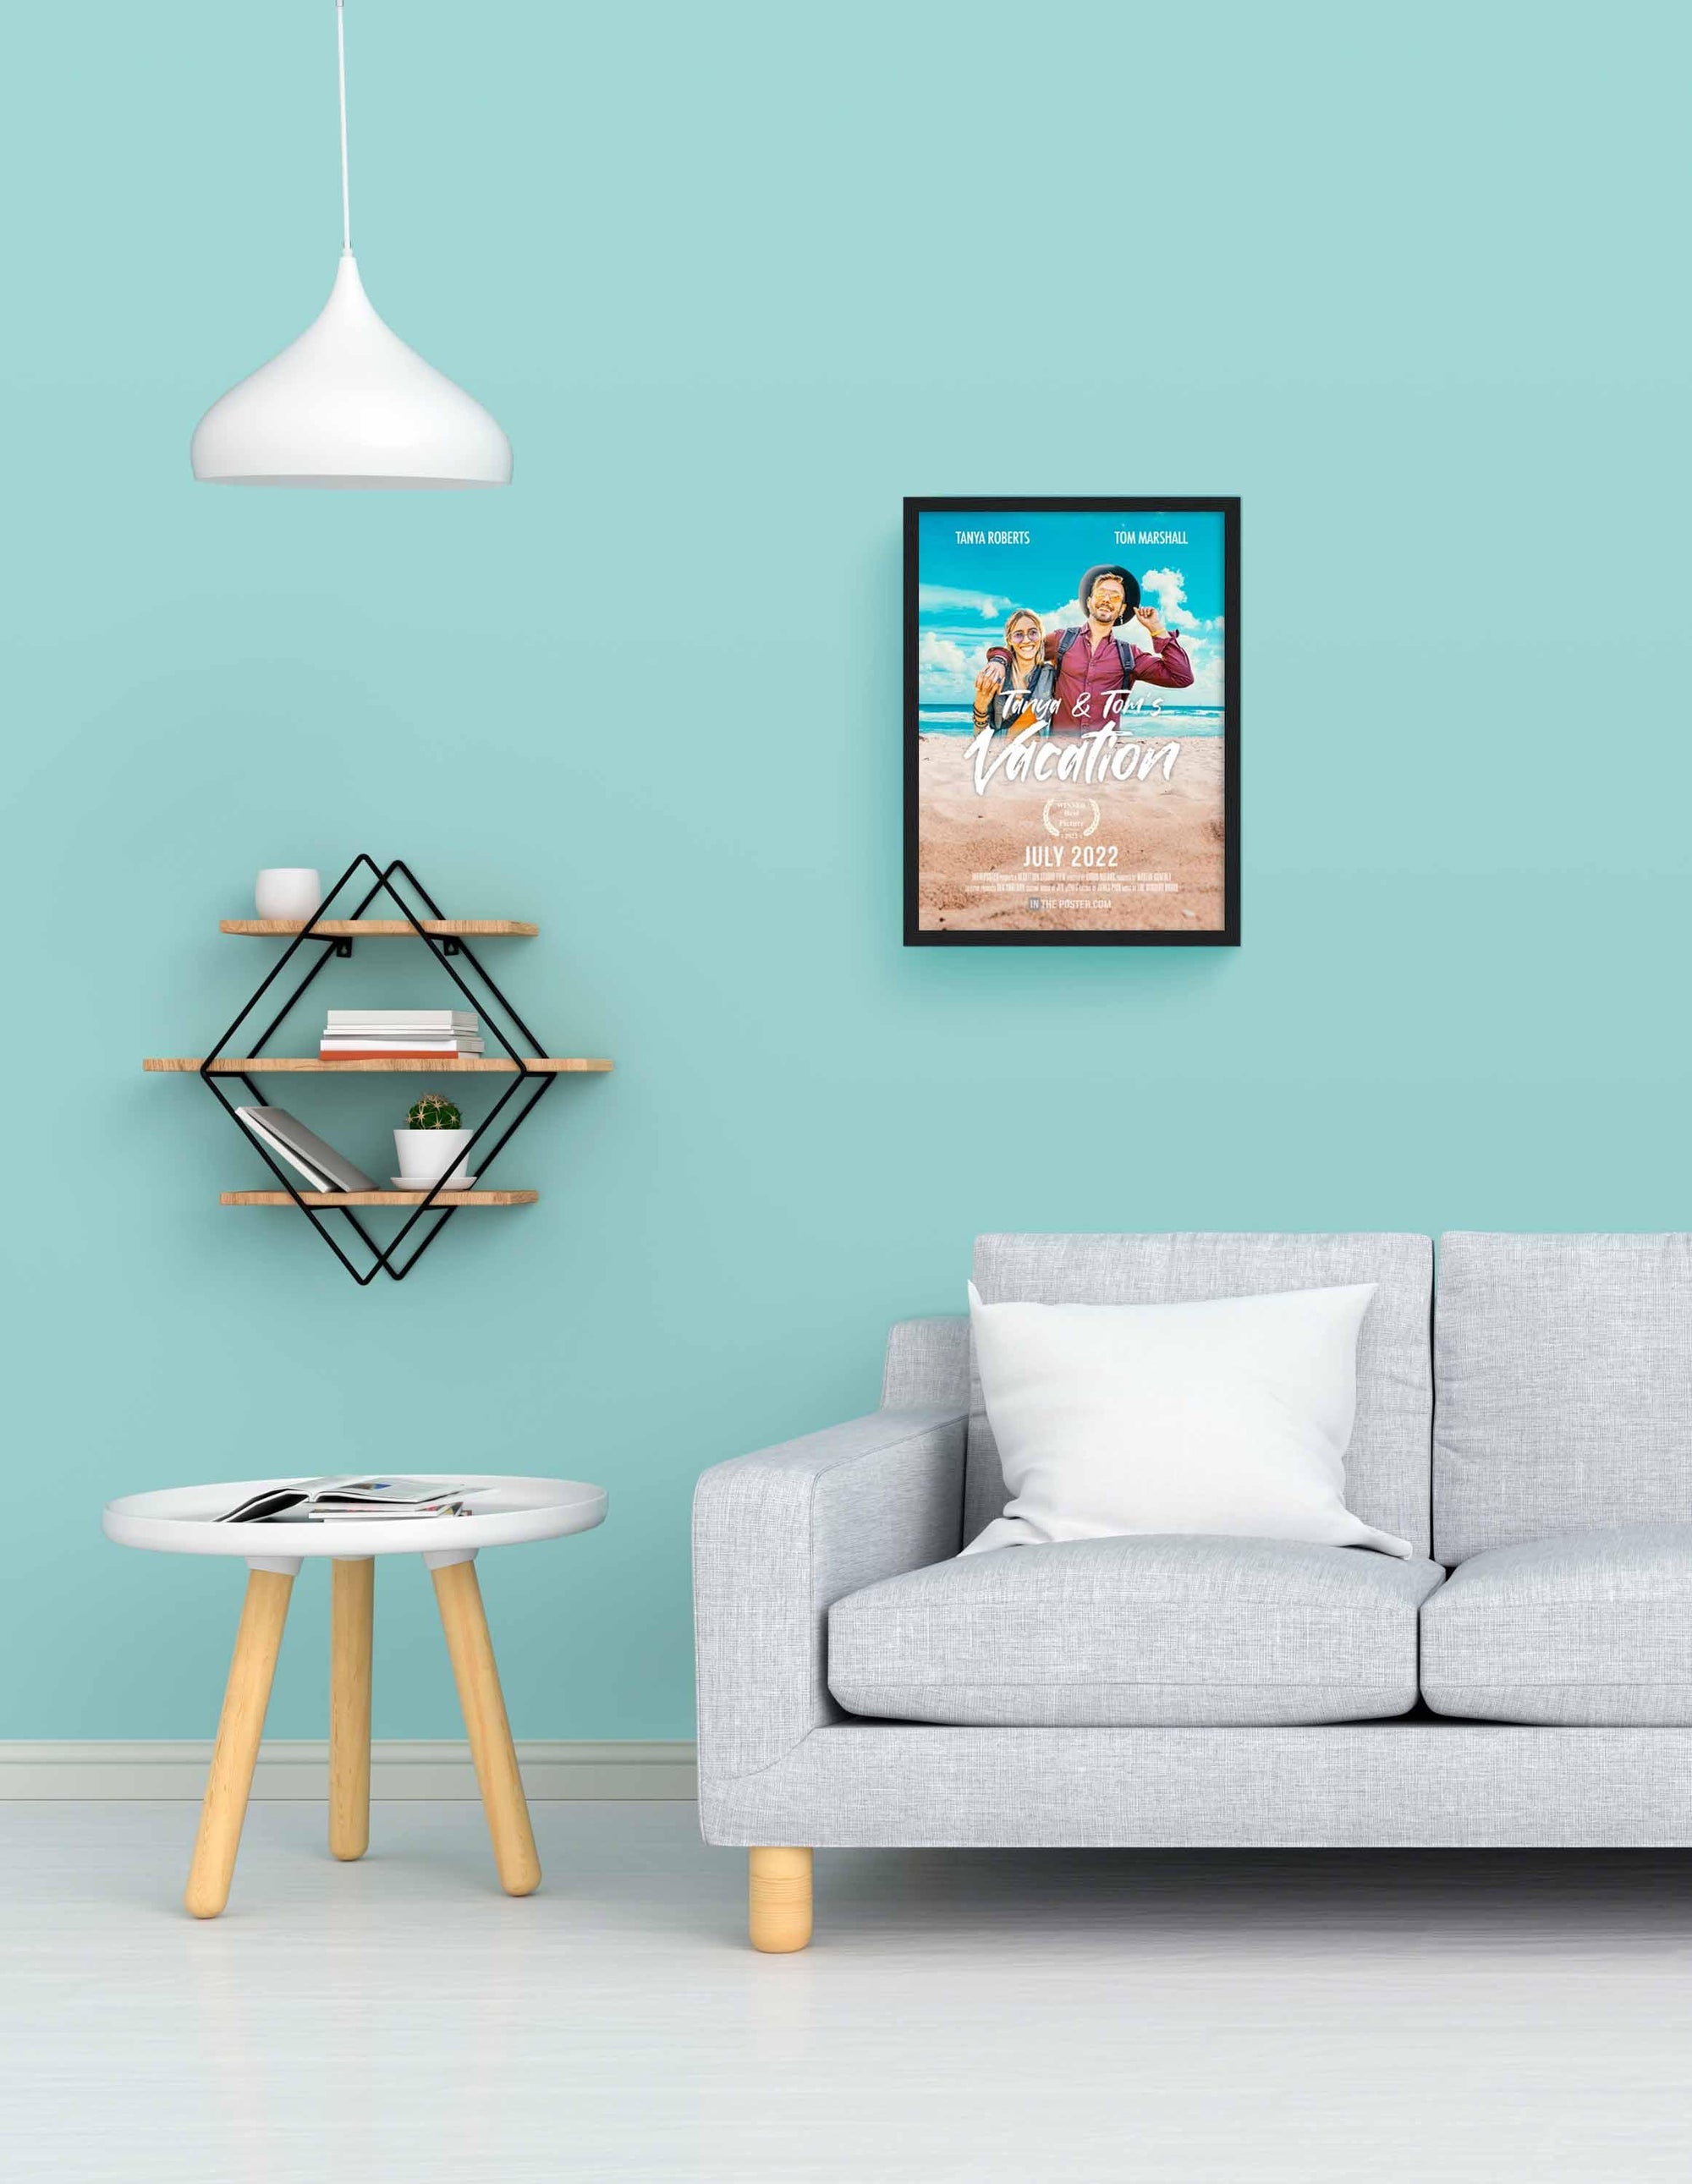 The Vacation - Travel Movie Poster in size small in a black picture frame on a blue wall above a grey sofa